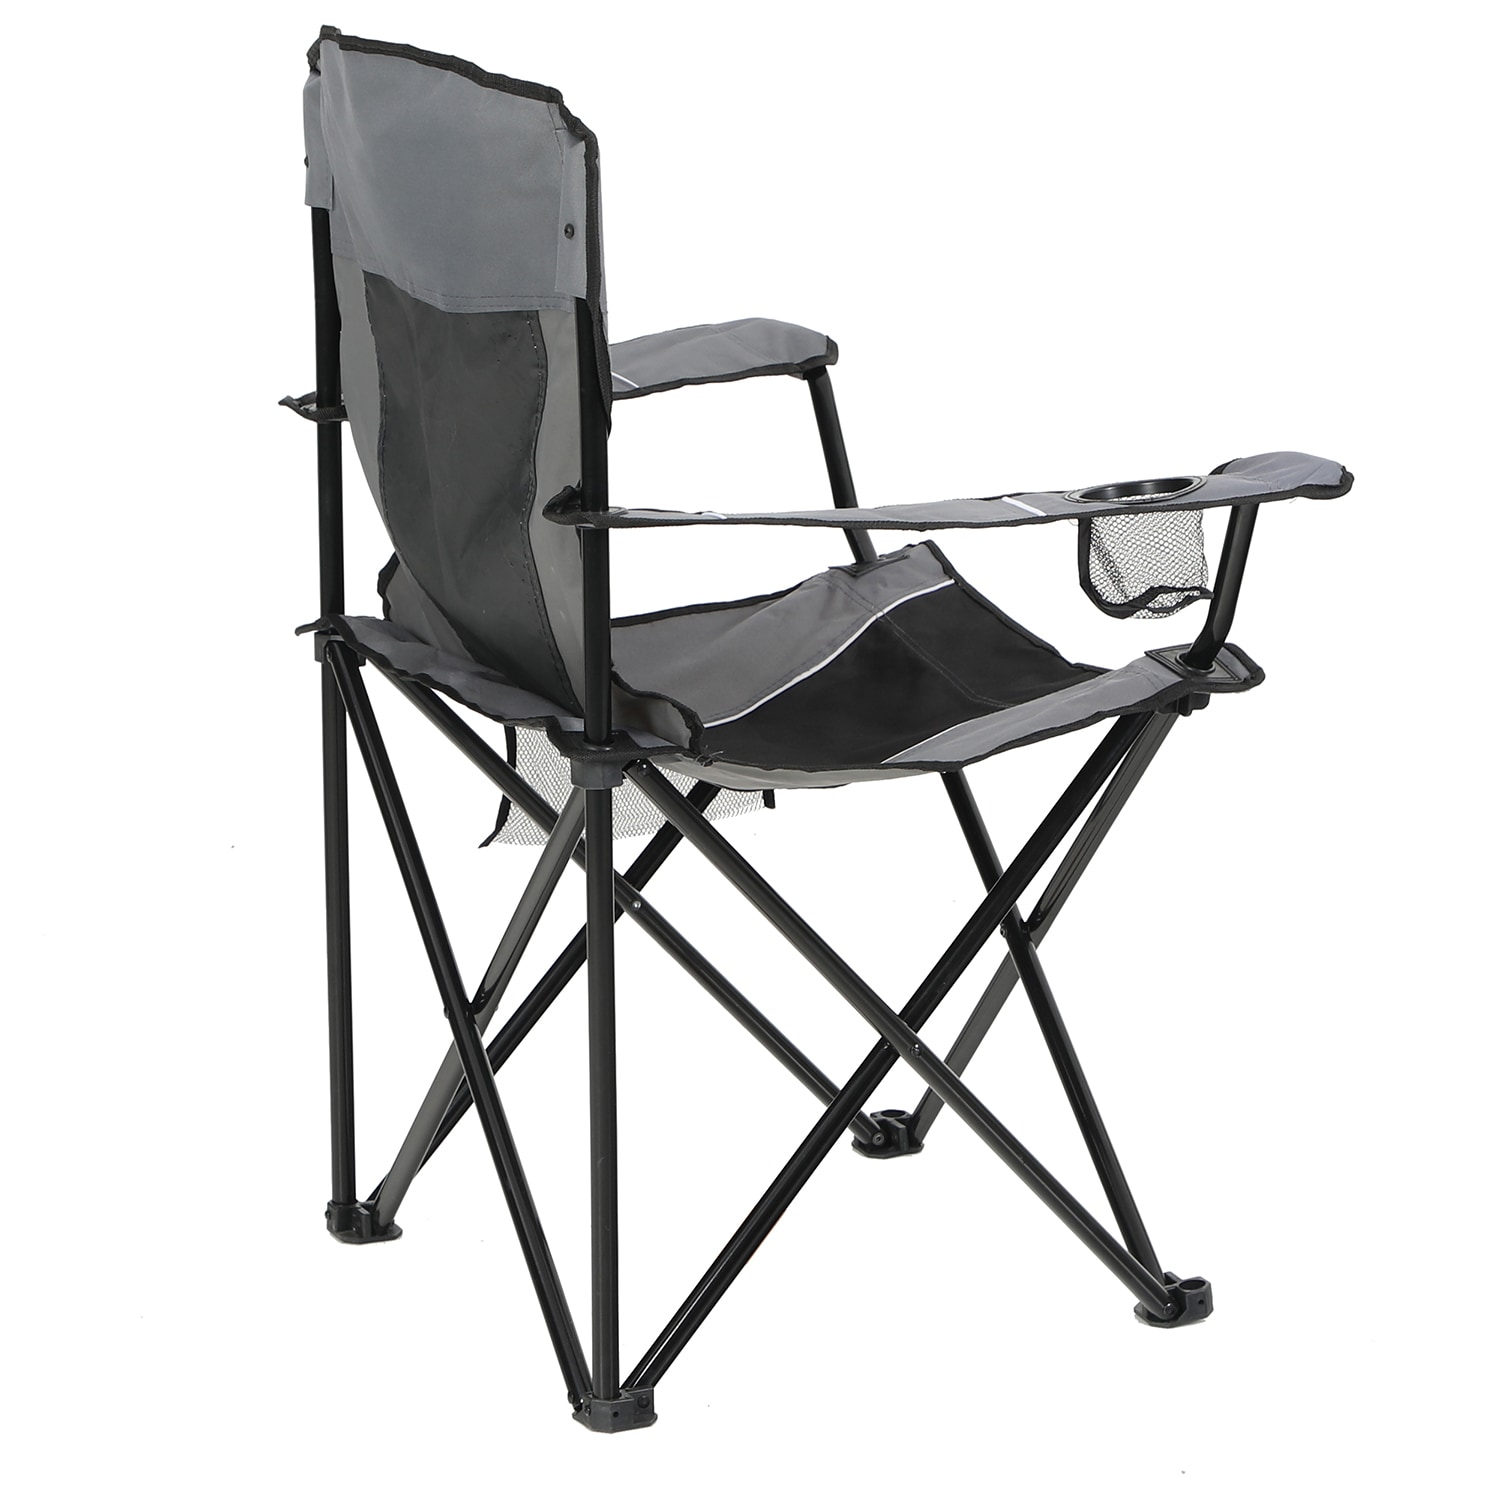 Ozark Trail Oversized Mesh Cooler Chair Review